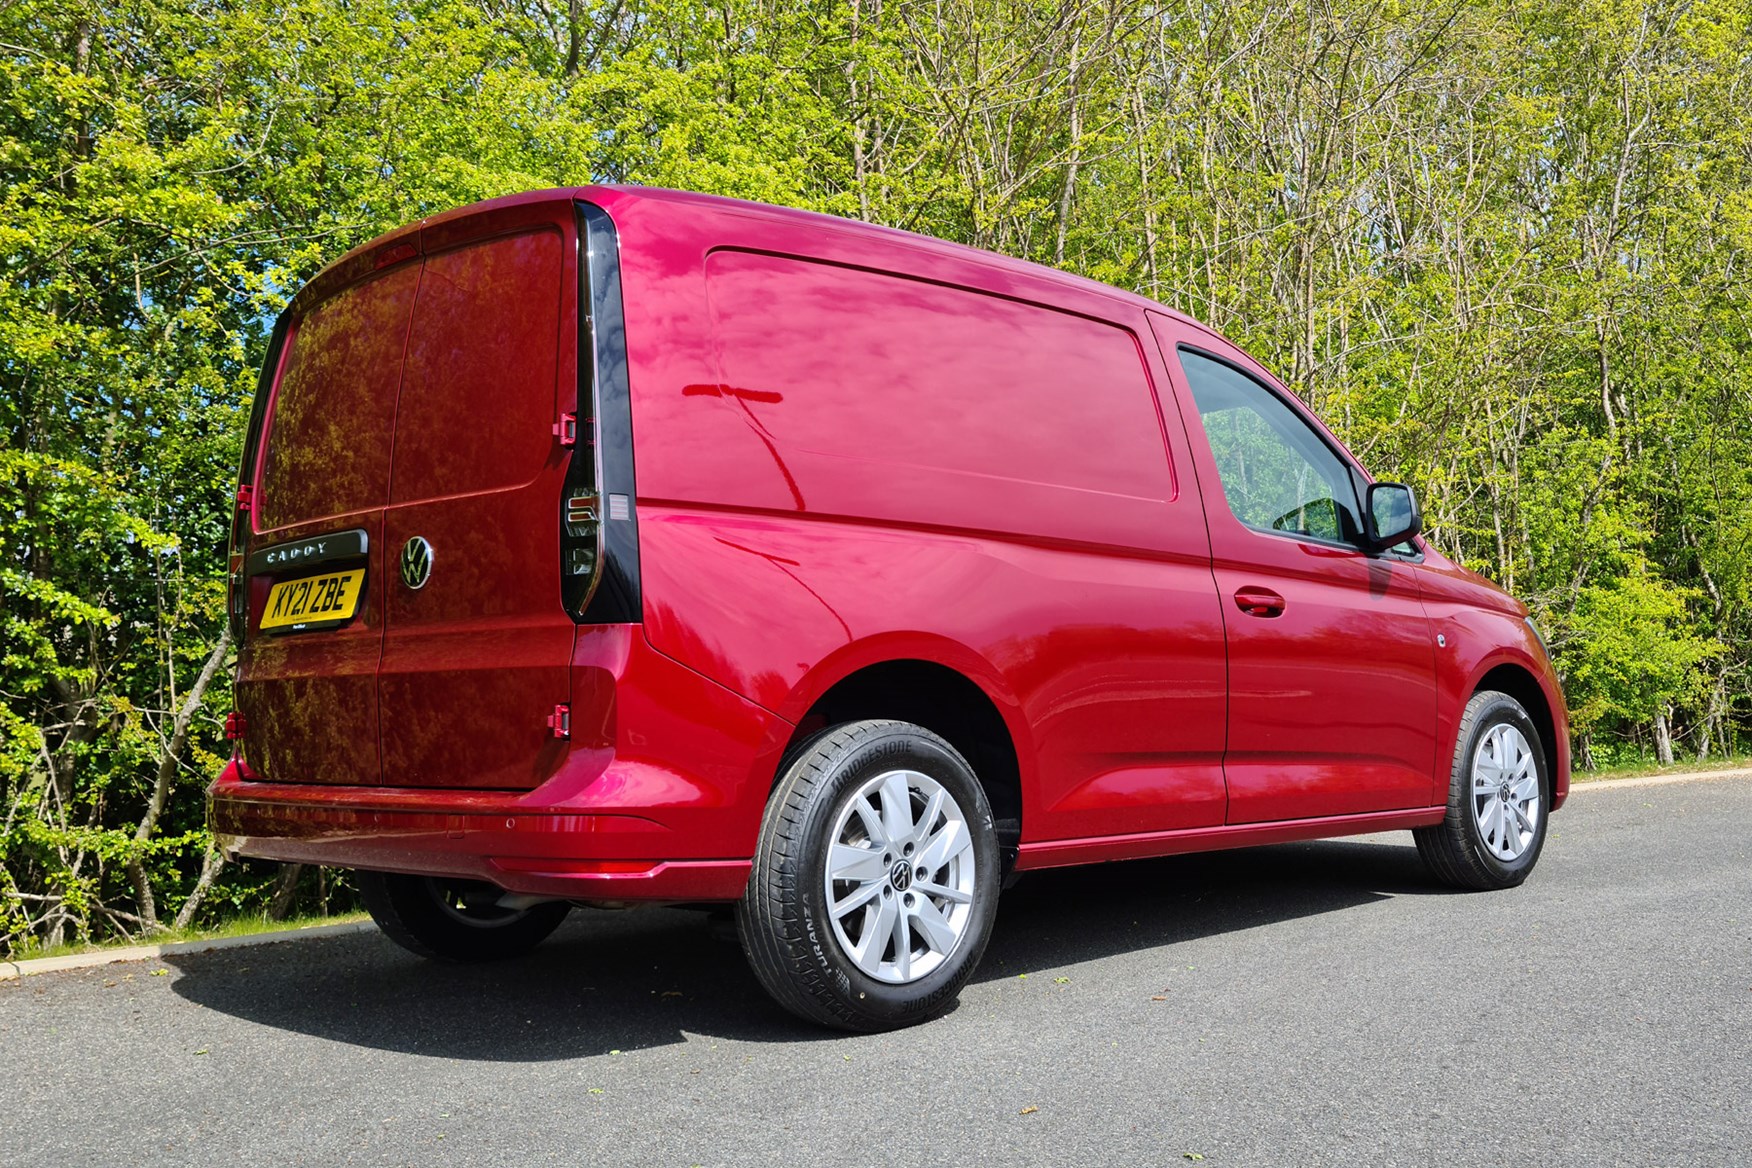 Volkswagen Caddy Cargo 1.5 TSI petrol review - rear view, red, low